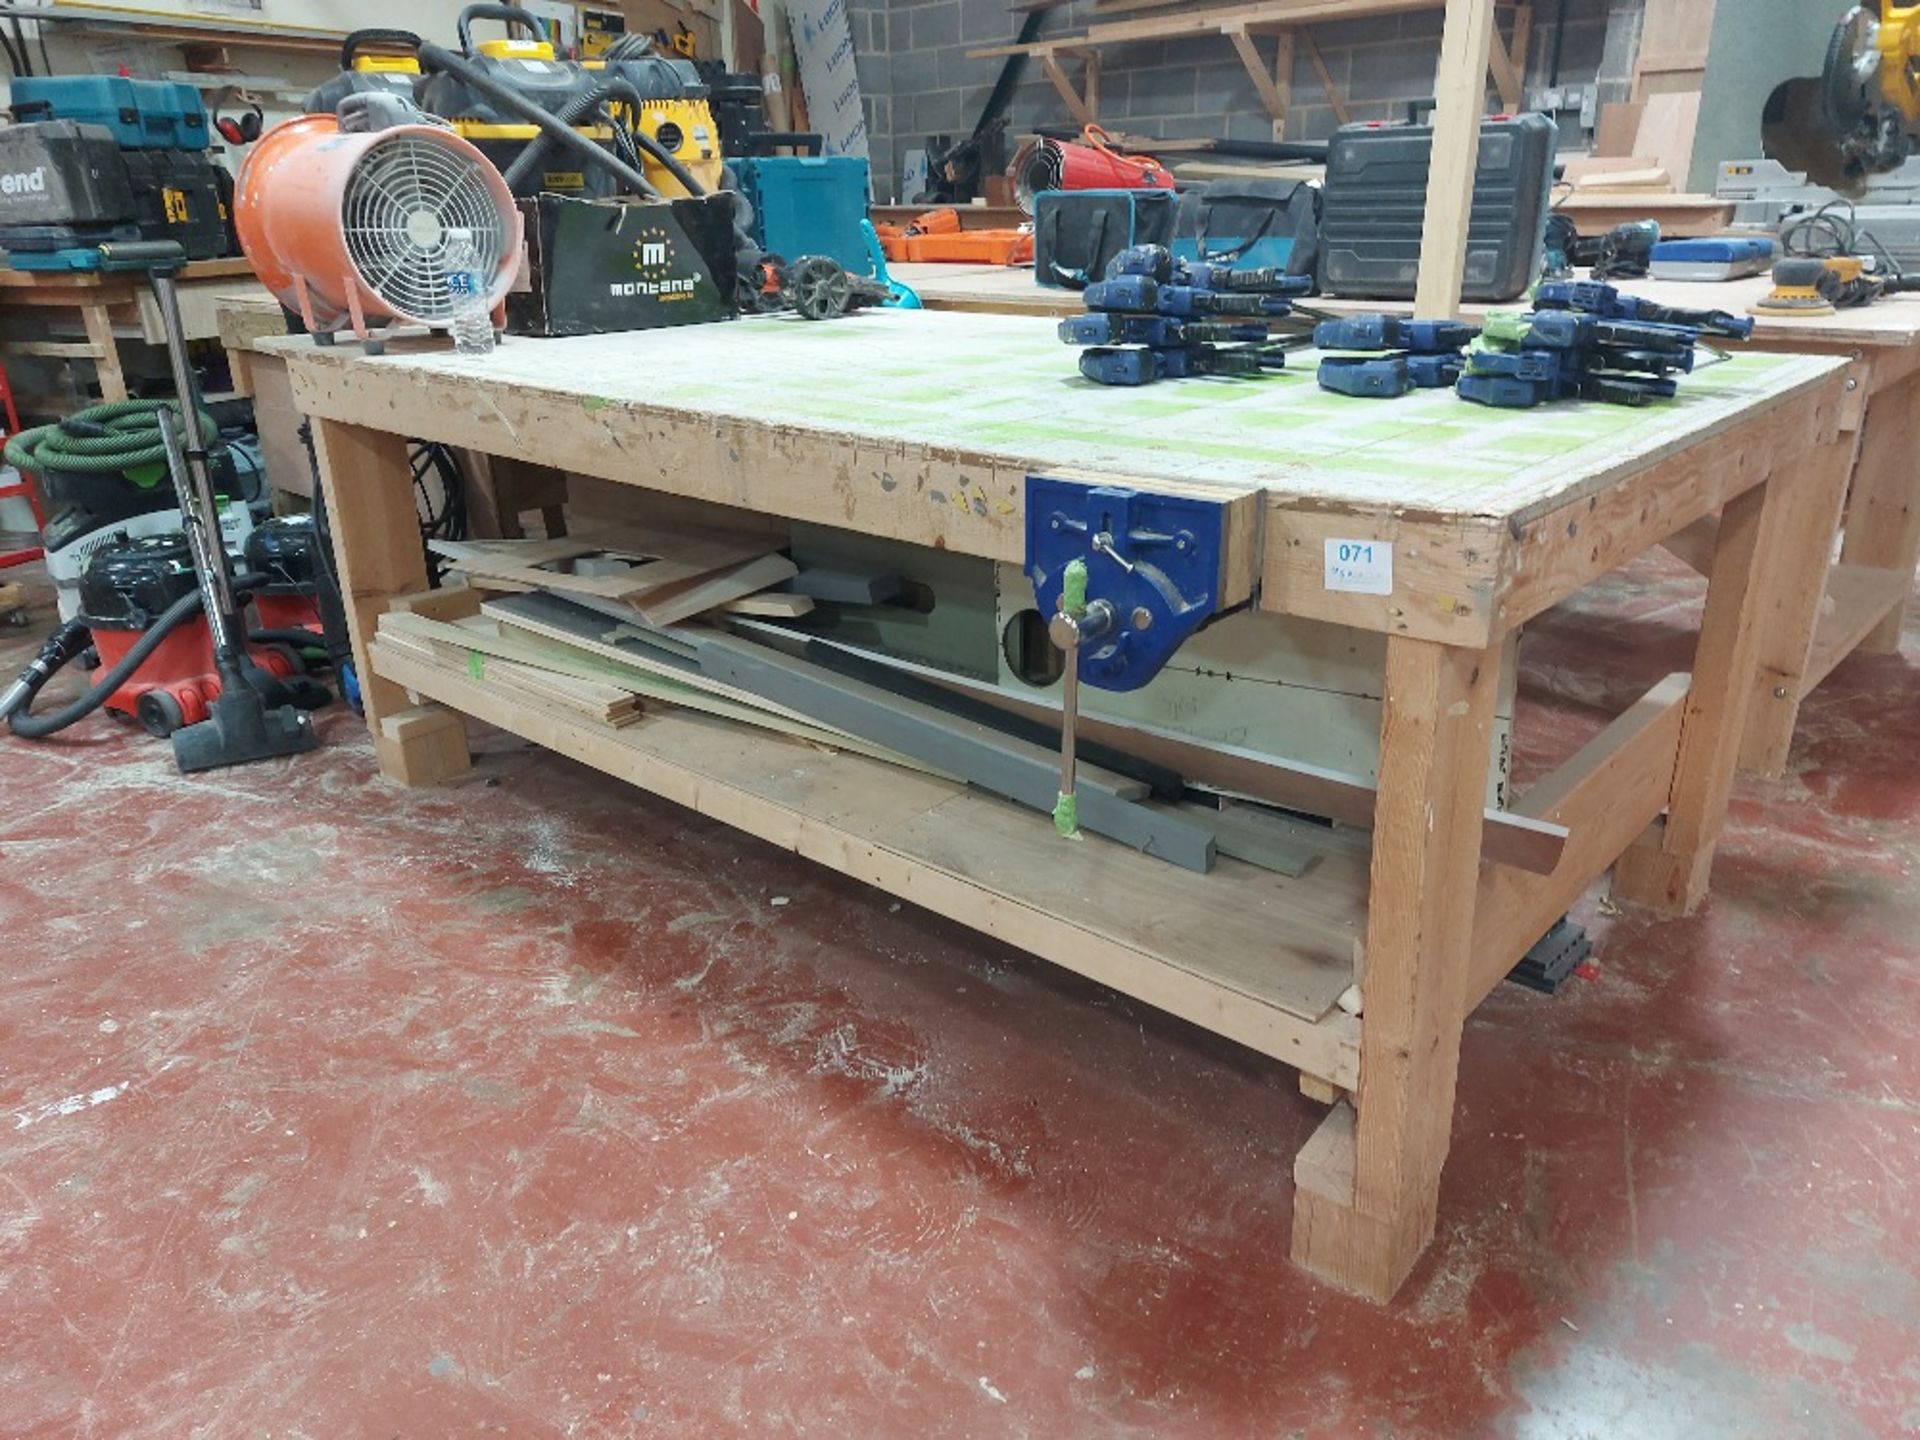 Fabricated Carpenters Workbench With Record Vice